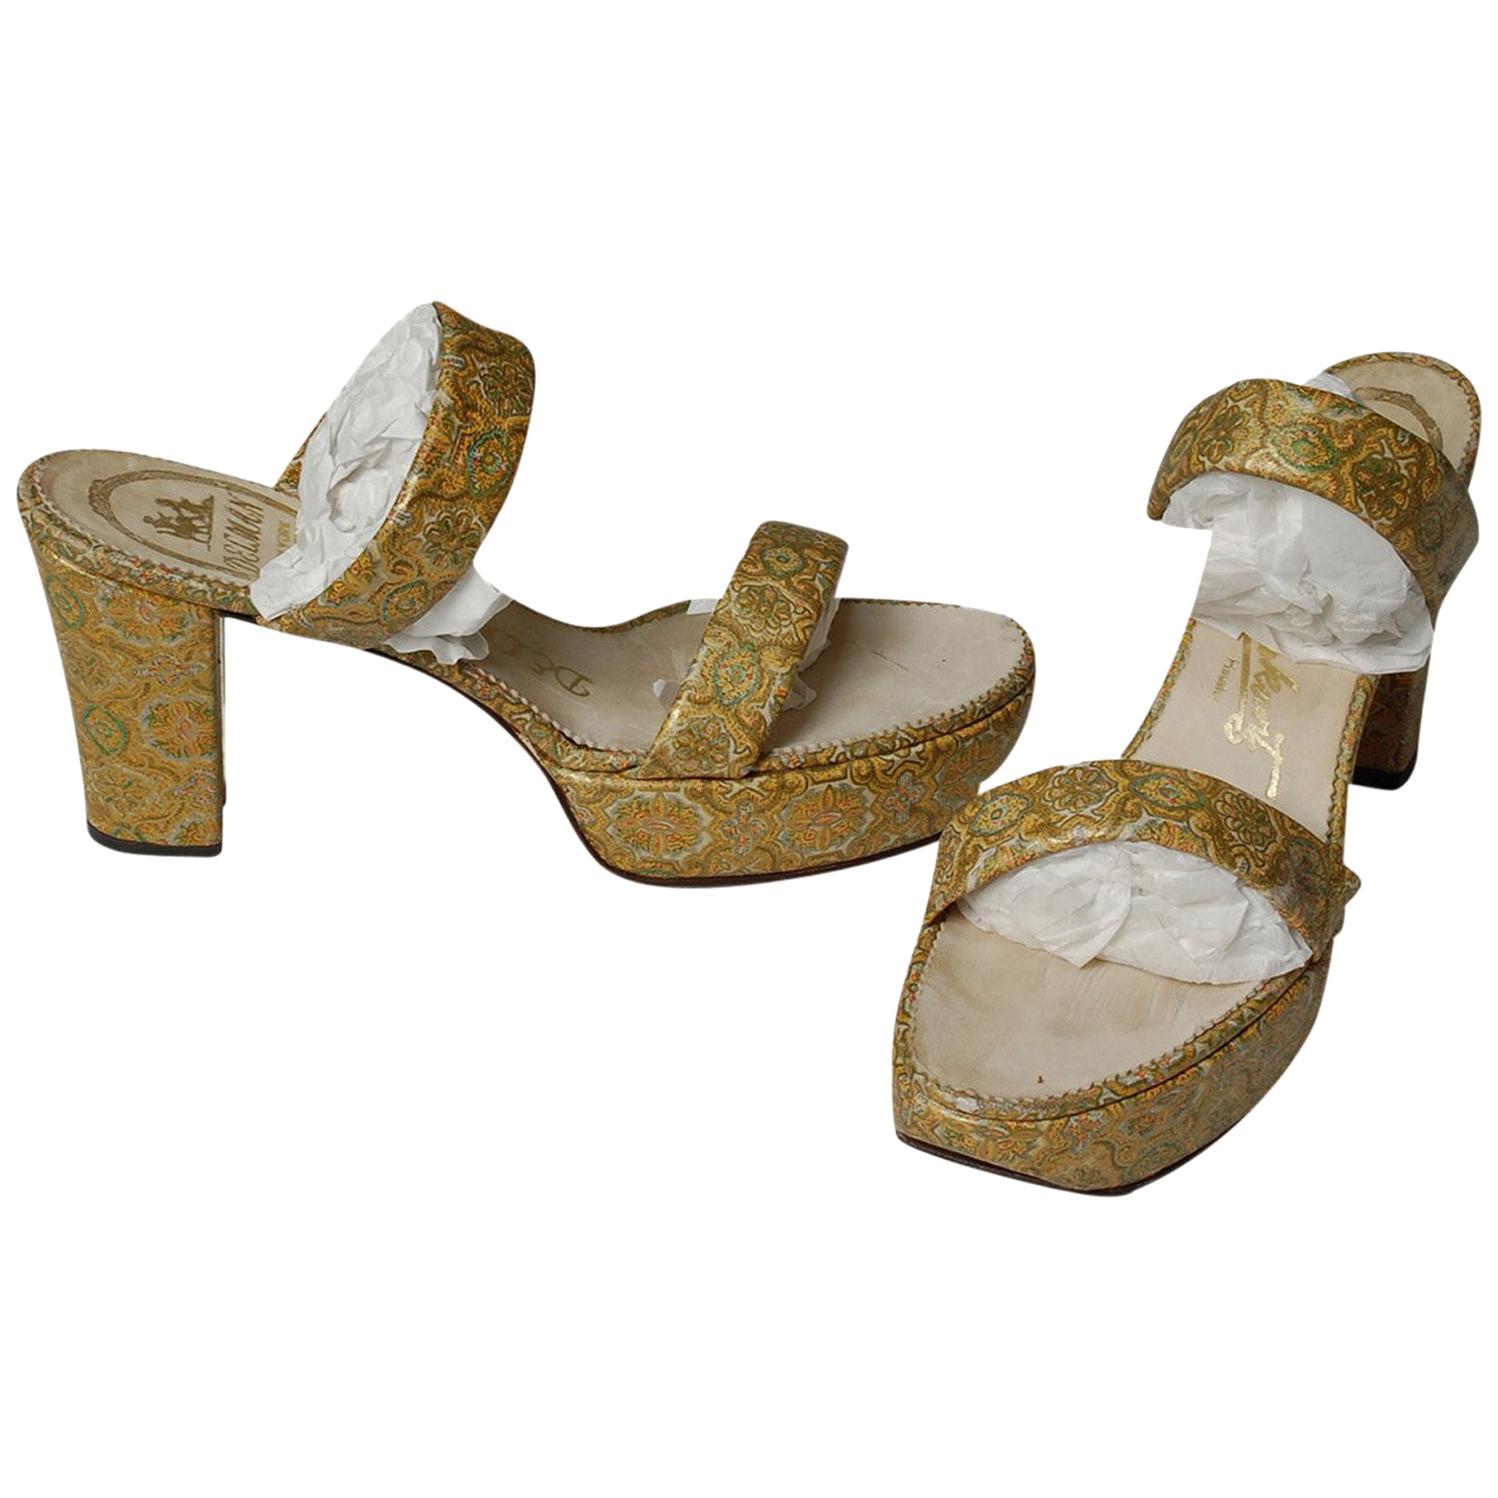 Delman Hand-Painted Gold Paisley Leather Platform Cha Cha Sandals - 6.5, 1940s